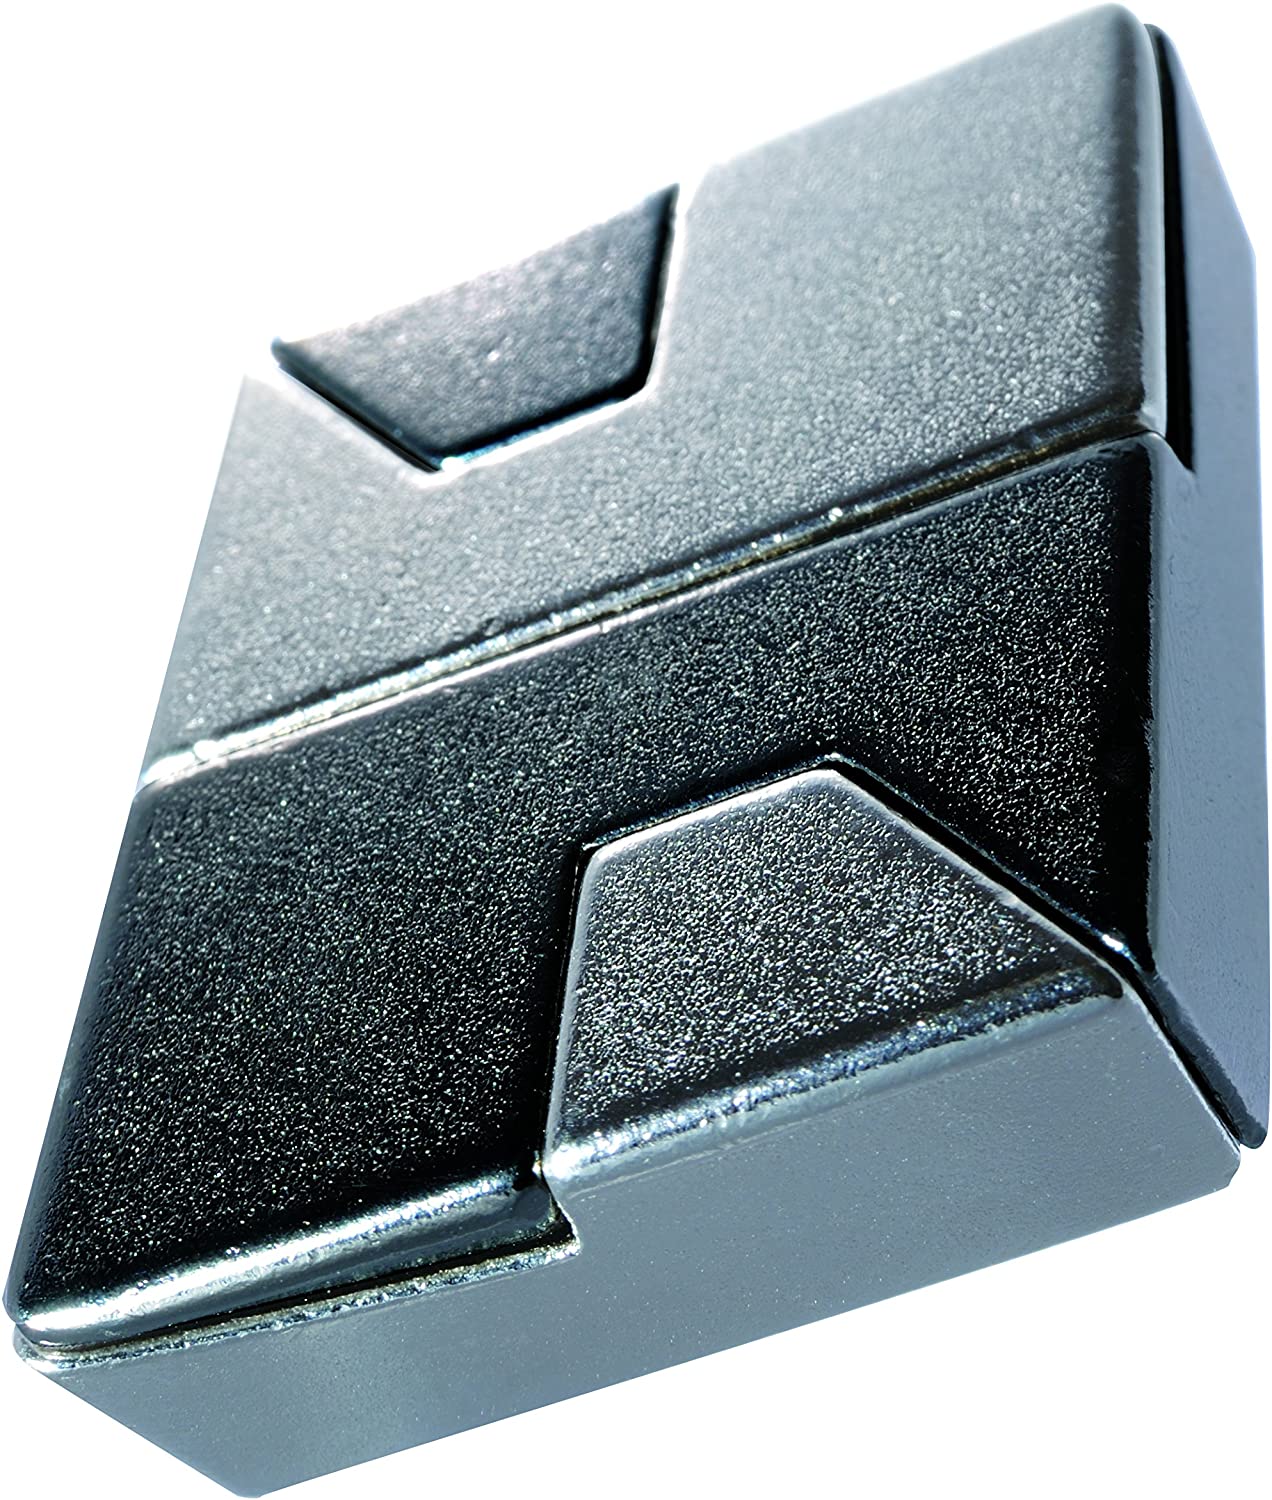 Bartl Huzzle Cast Puzzles, 50 Different High Quality Metal Puzzles for Experts Choose from a range of puzzles..., Diamond